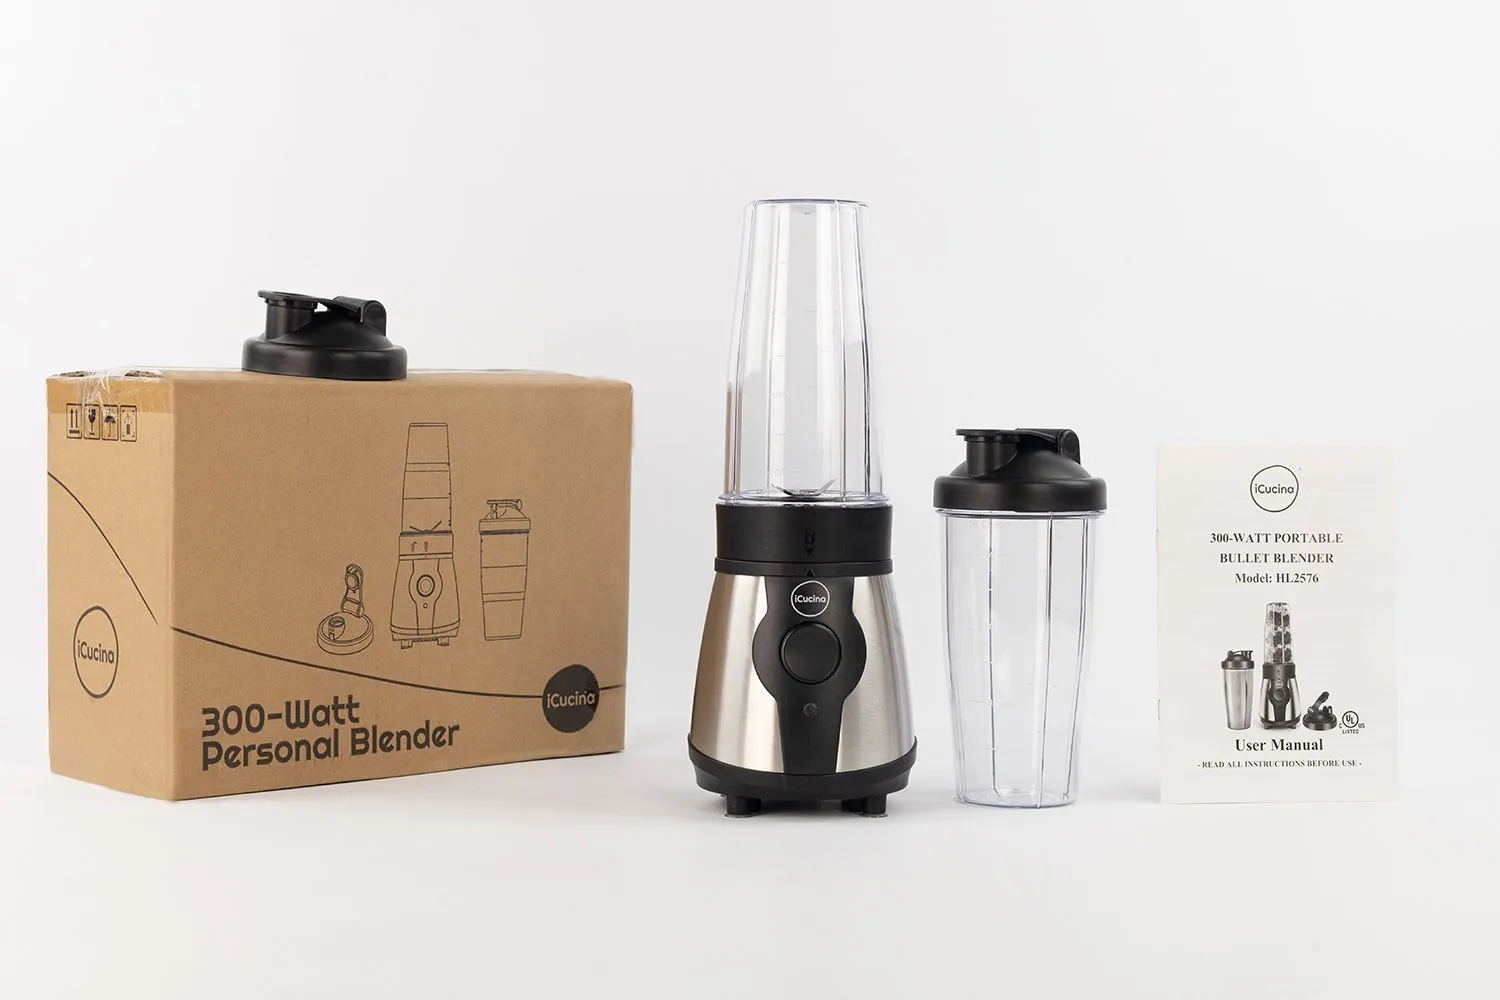 5 Things You Can Blend in Your Portable Blender That Aren't